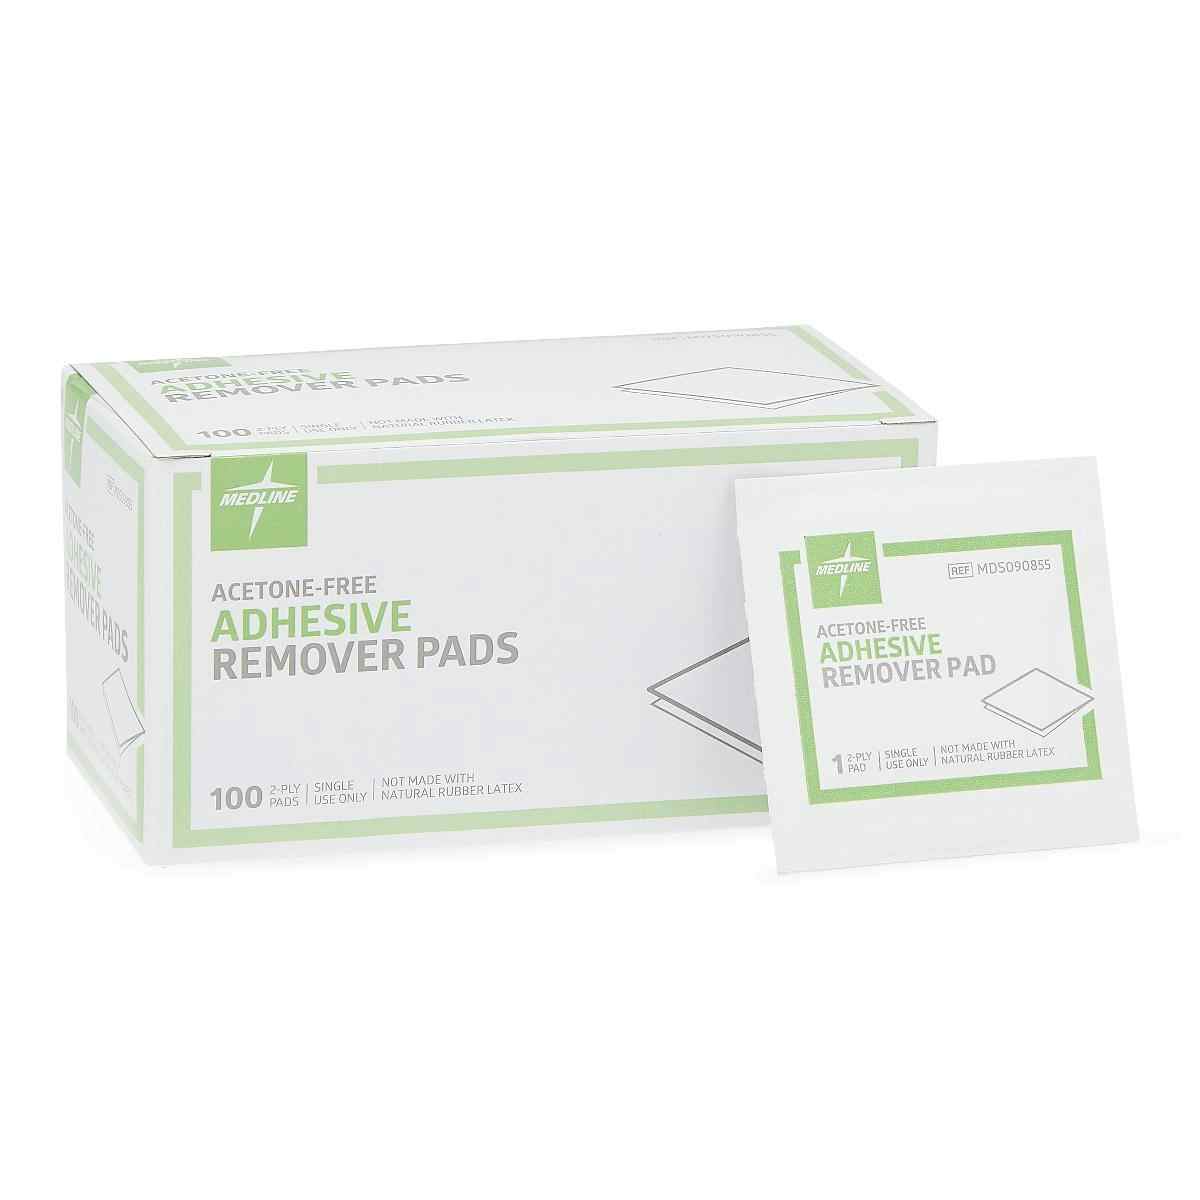 Medline Acetone-Free Adhesive Remover Pads, MDS090855, Case of 1000